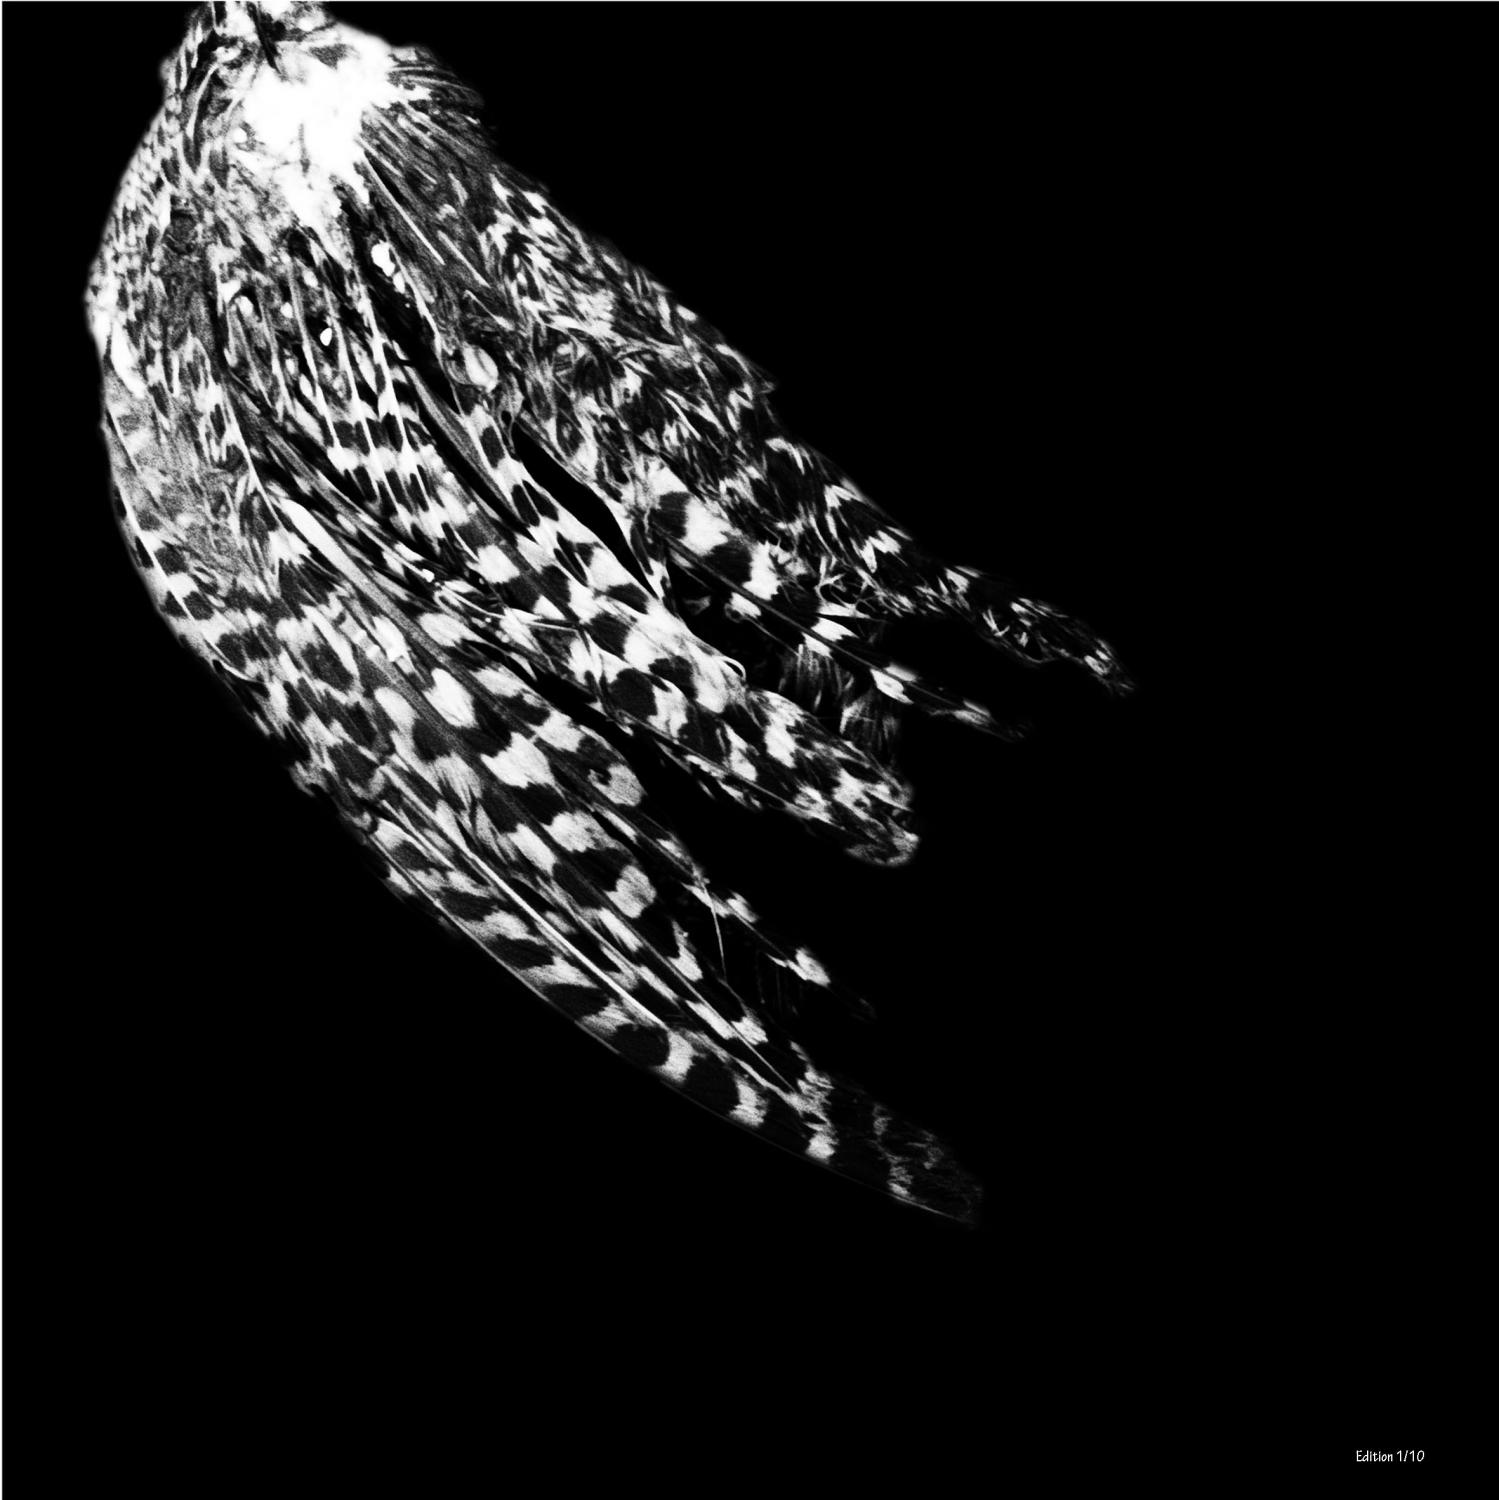 black and white bird aesthetic, stylish, beautiful, artistic photographs for sale - online contemporary art